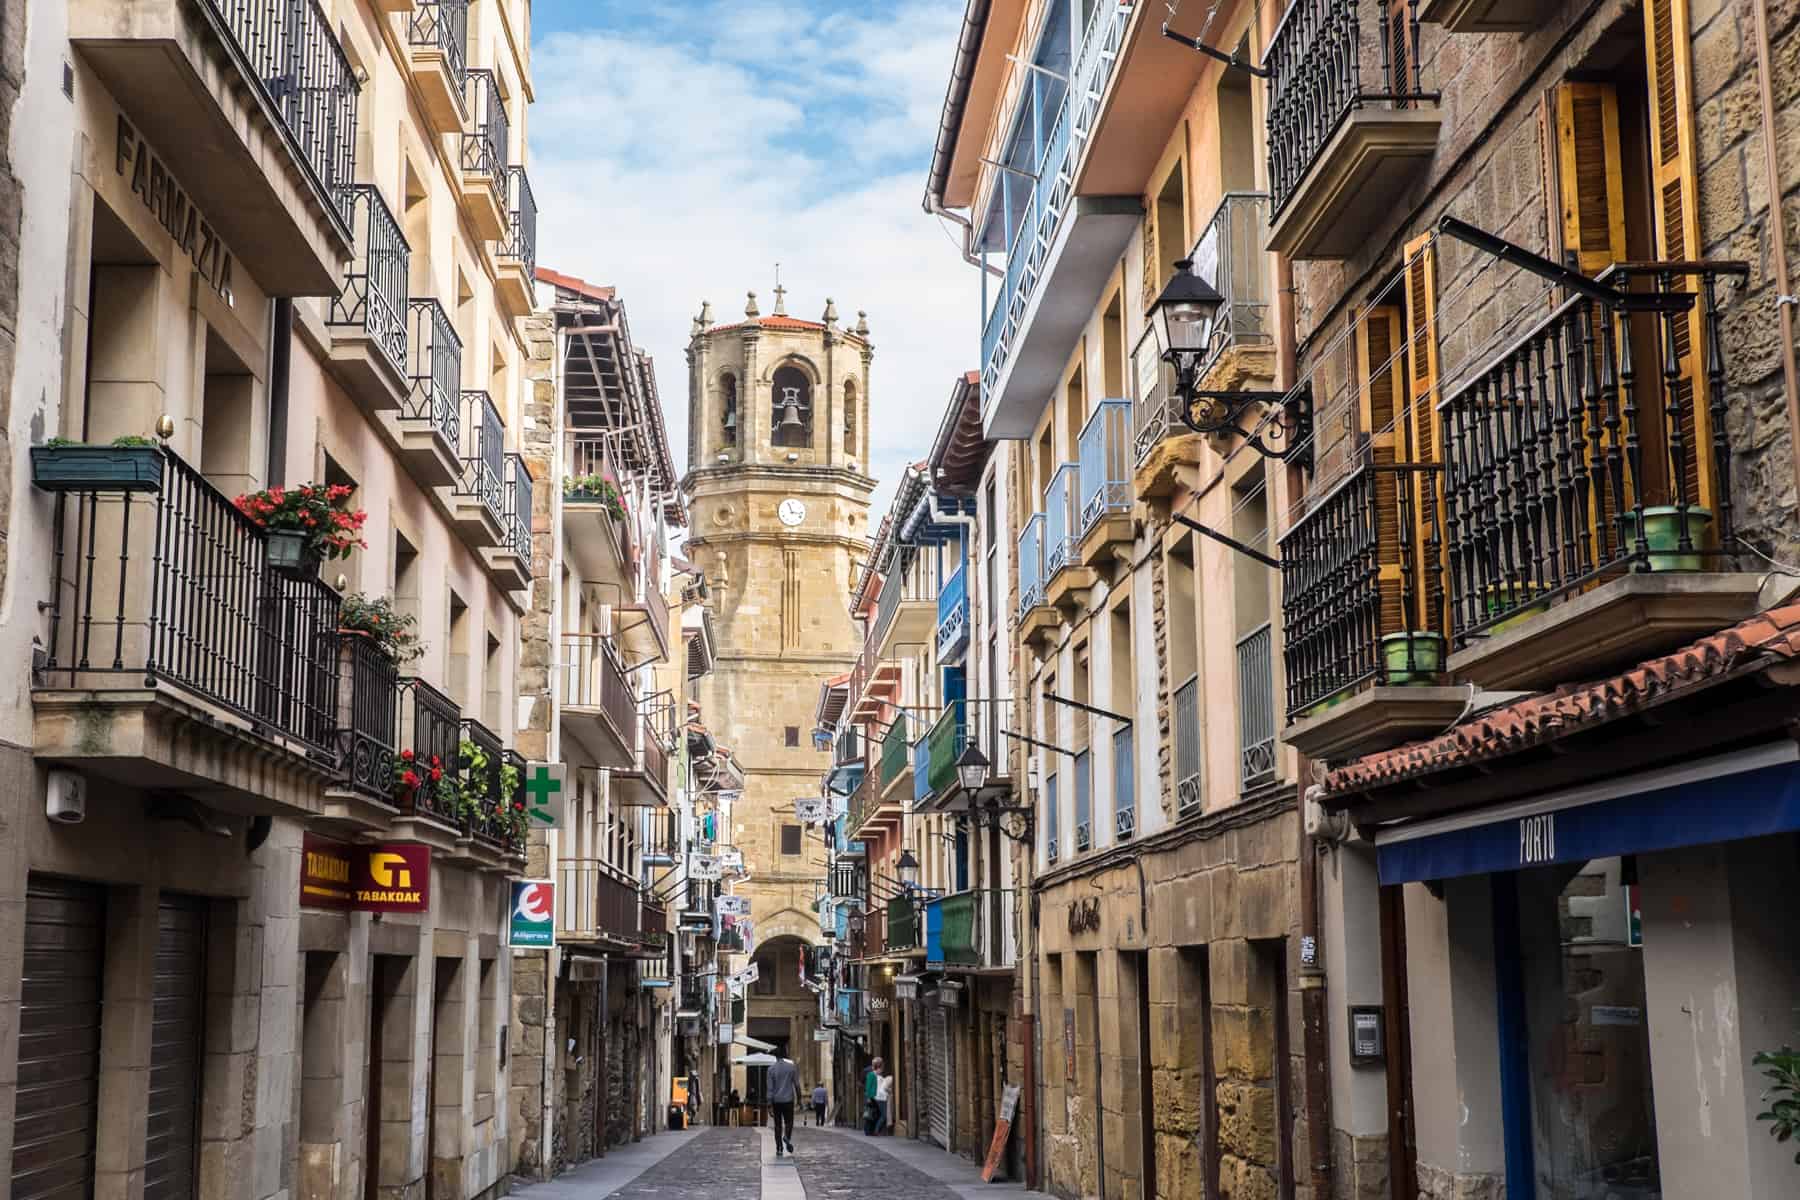 A golden church tower stands at the end and in the middle of an old stone building street full of balconies in the Spanish city of San Sebastian. A man is walking towards the tower. 